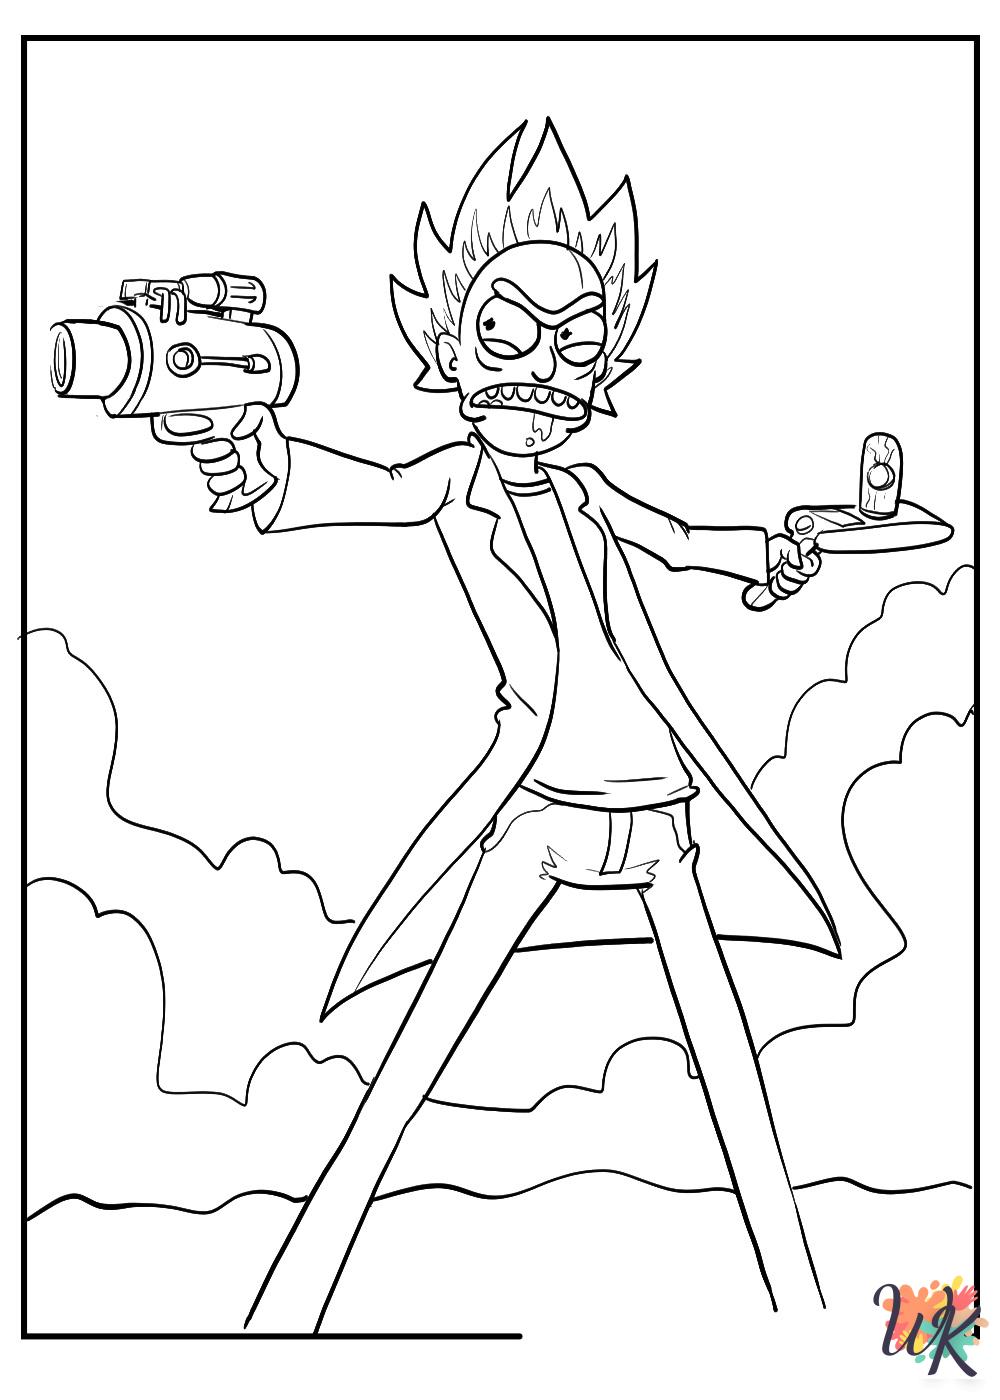 Rick and Morty coloring pages printable free